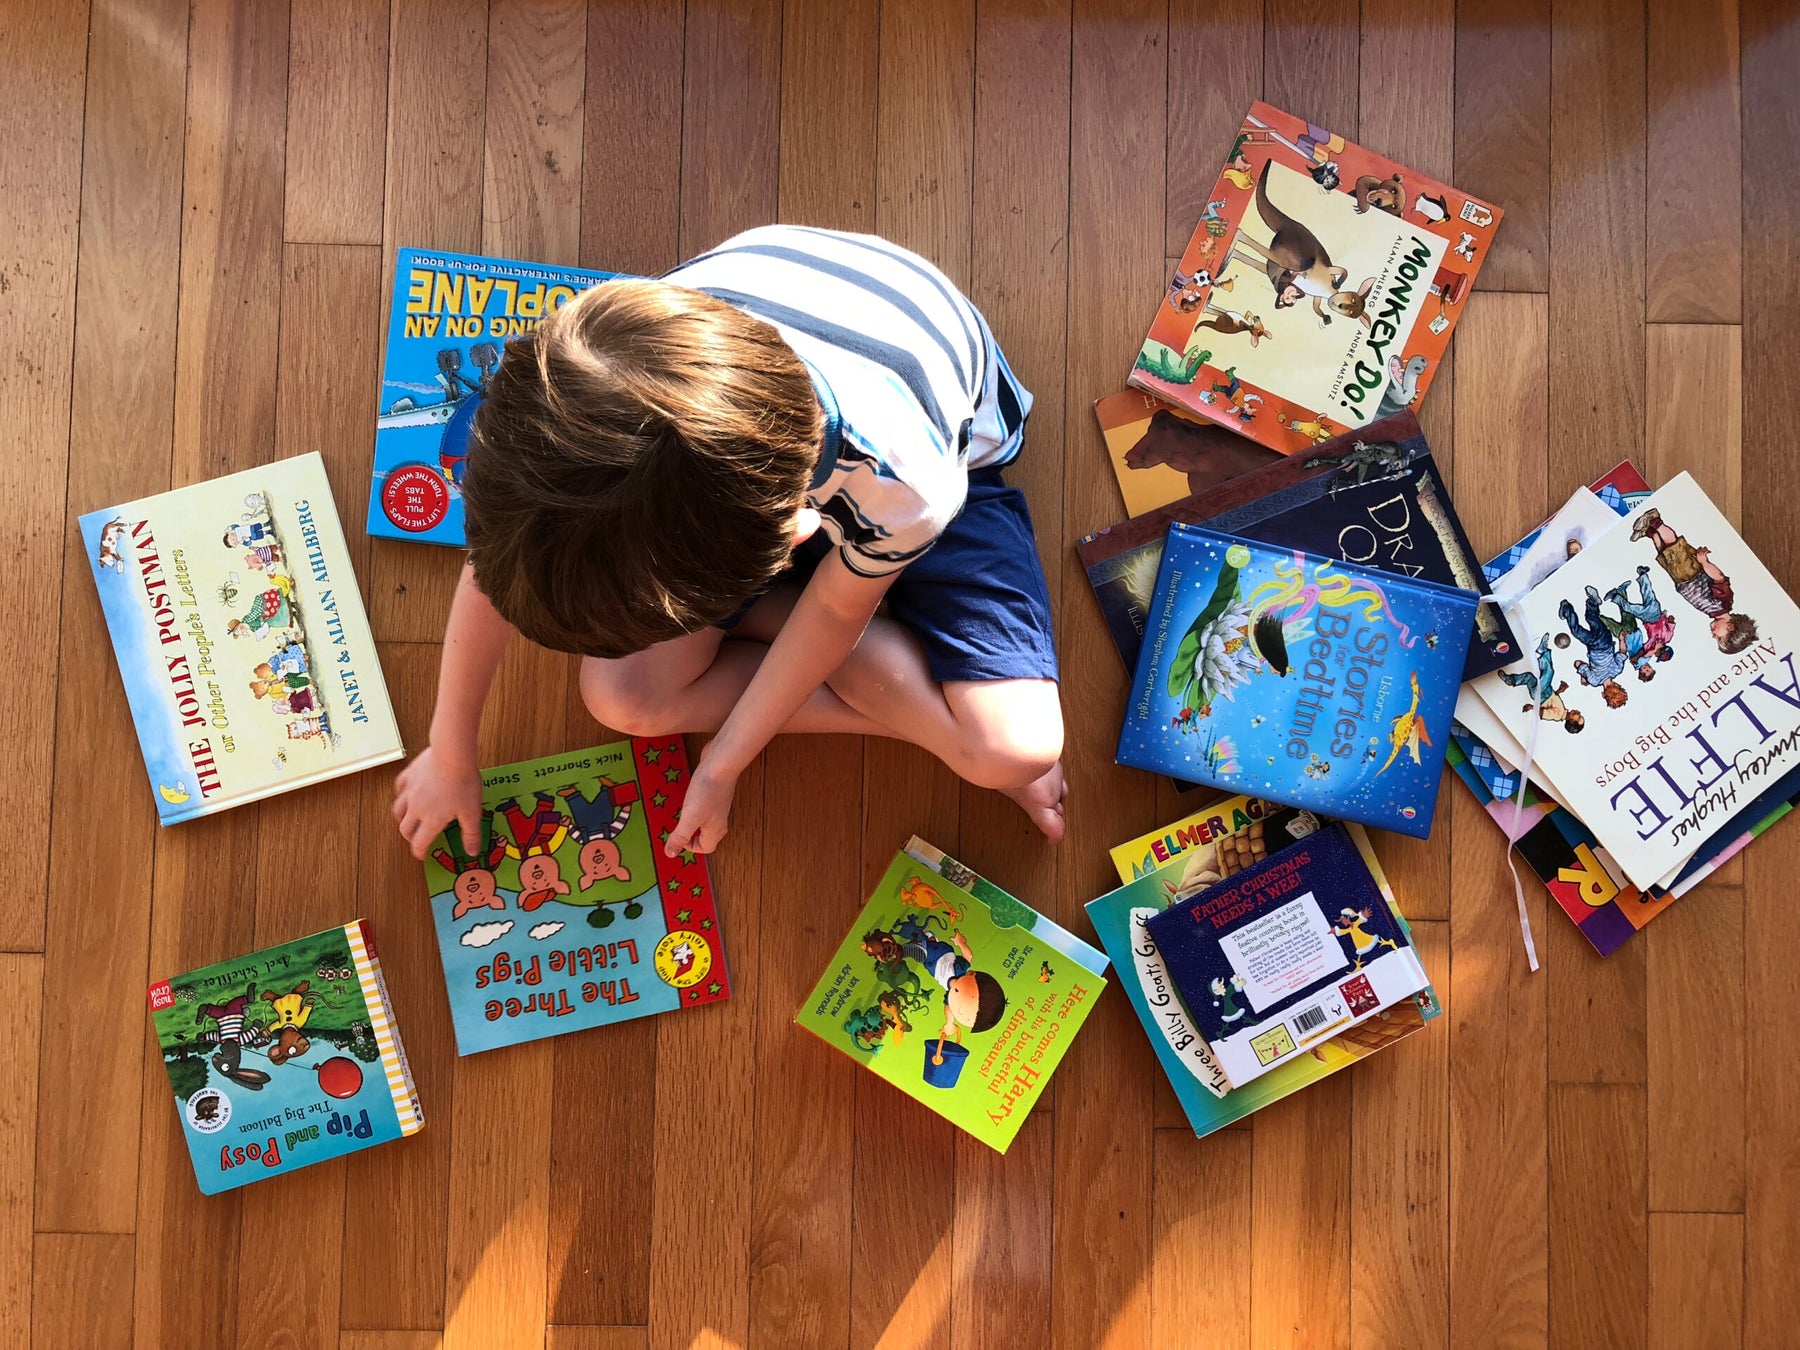 HOW TO CHOOSE BOOKS FOR CHILDREN